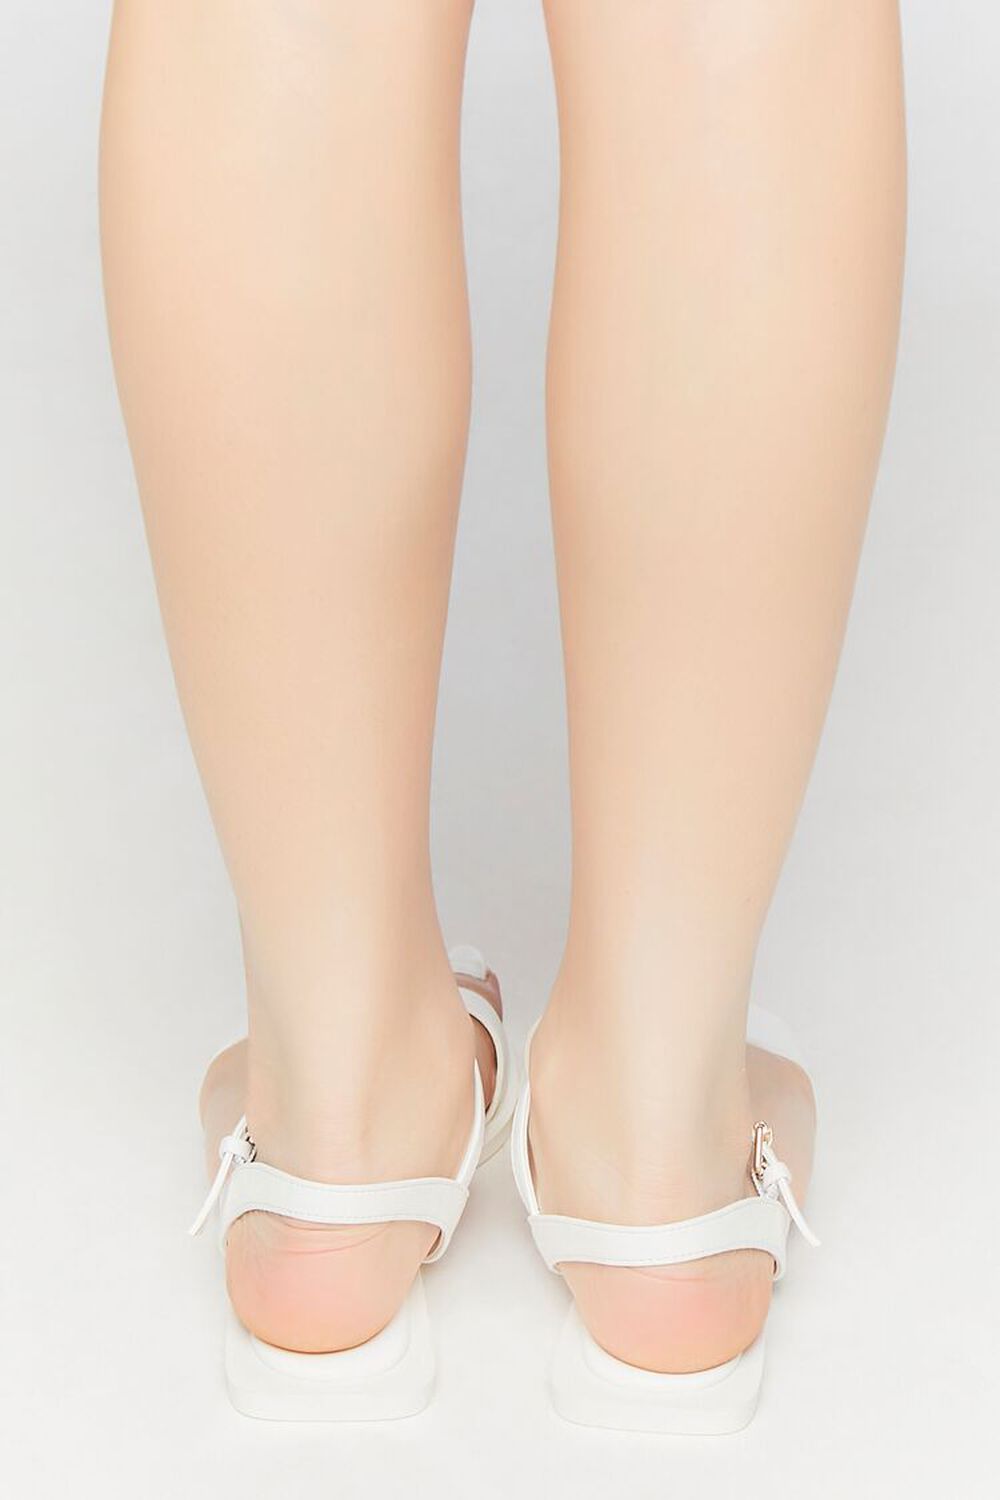 WHITE Faux Leather Open-Toe Sandals, image 3